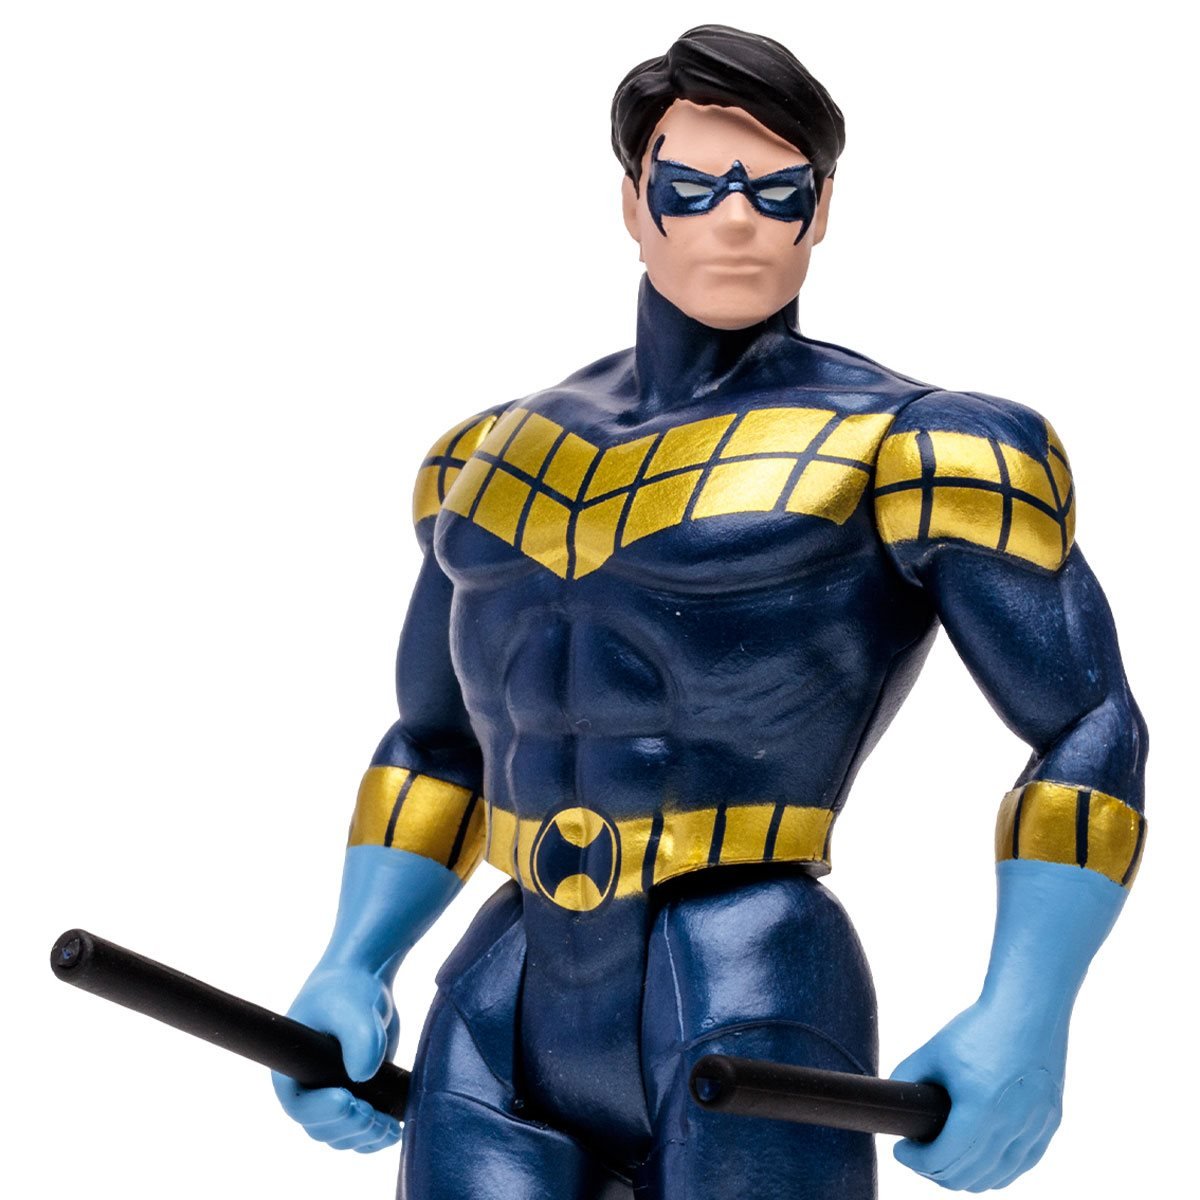 MCFARLANE DC Super Powers Wave 5 Nightwing Knightfall 4-Inch Scale Action Figure